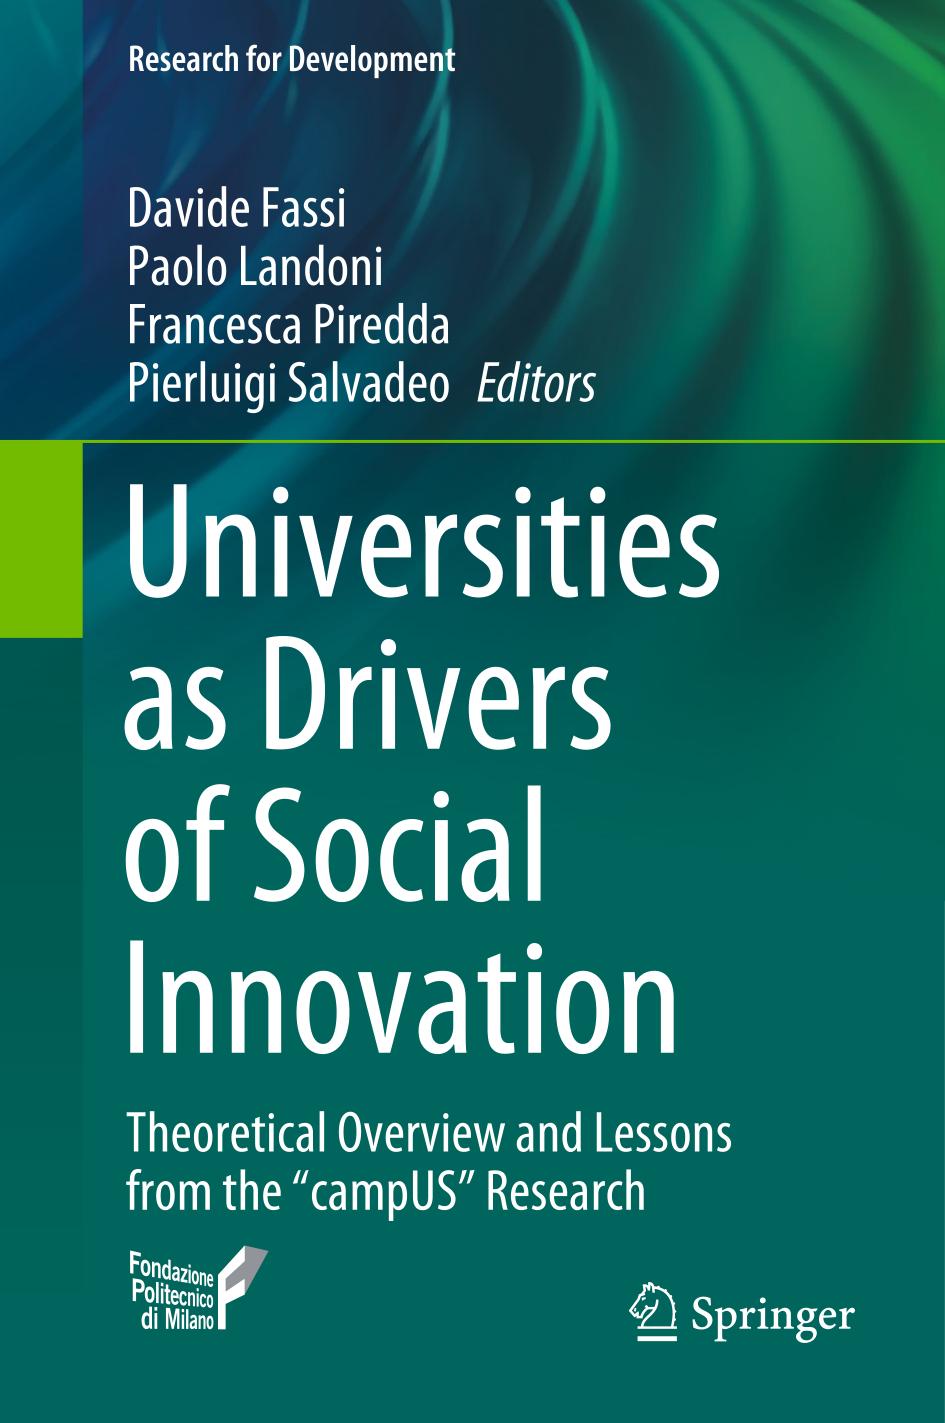 Universities as Drivers of Social Innovation : Theoretical Overview and Lessons from the "campUS" Research